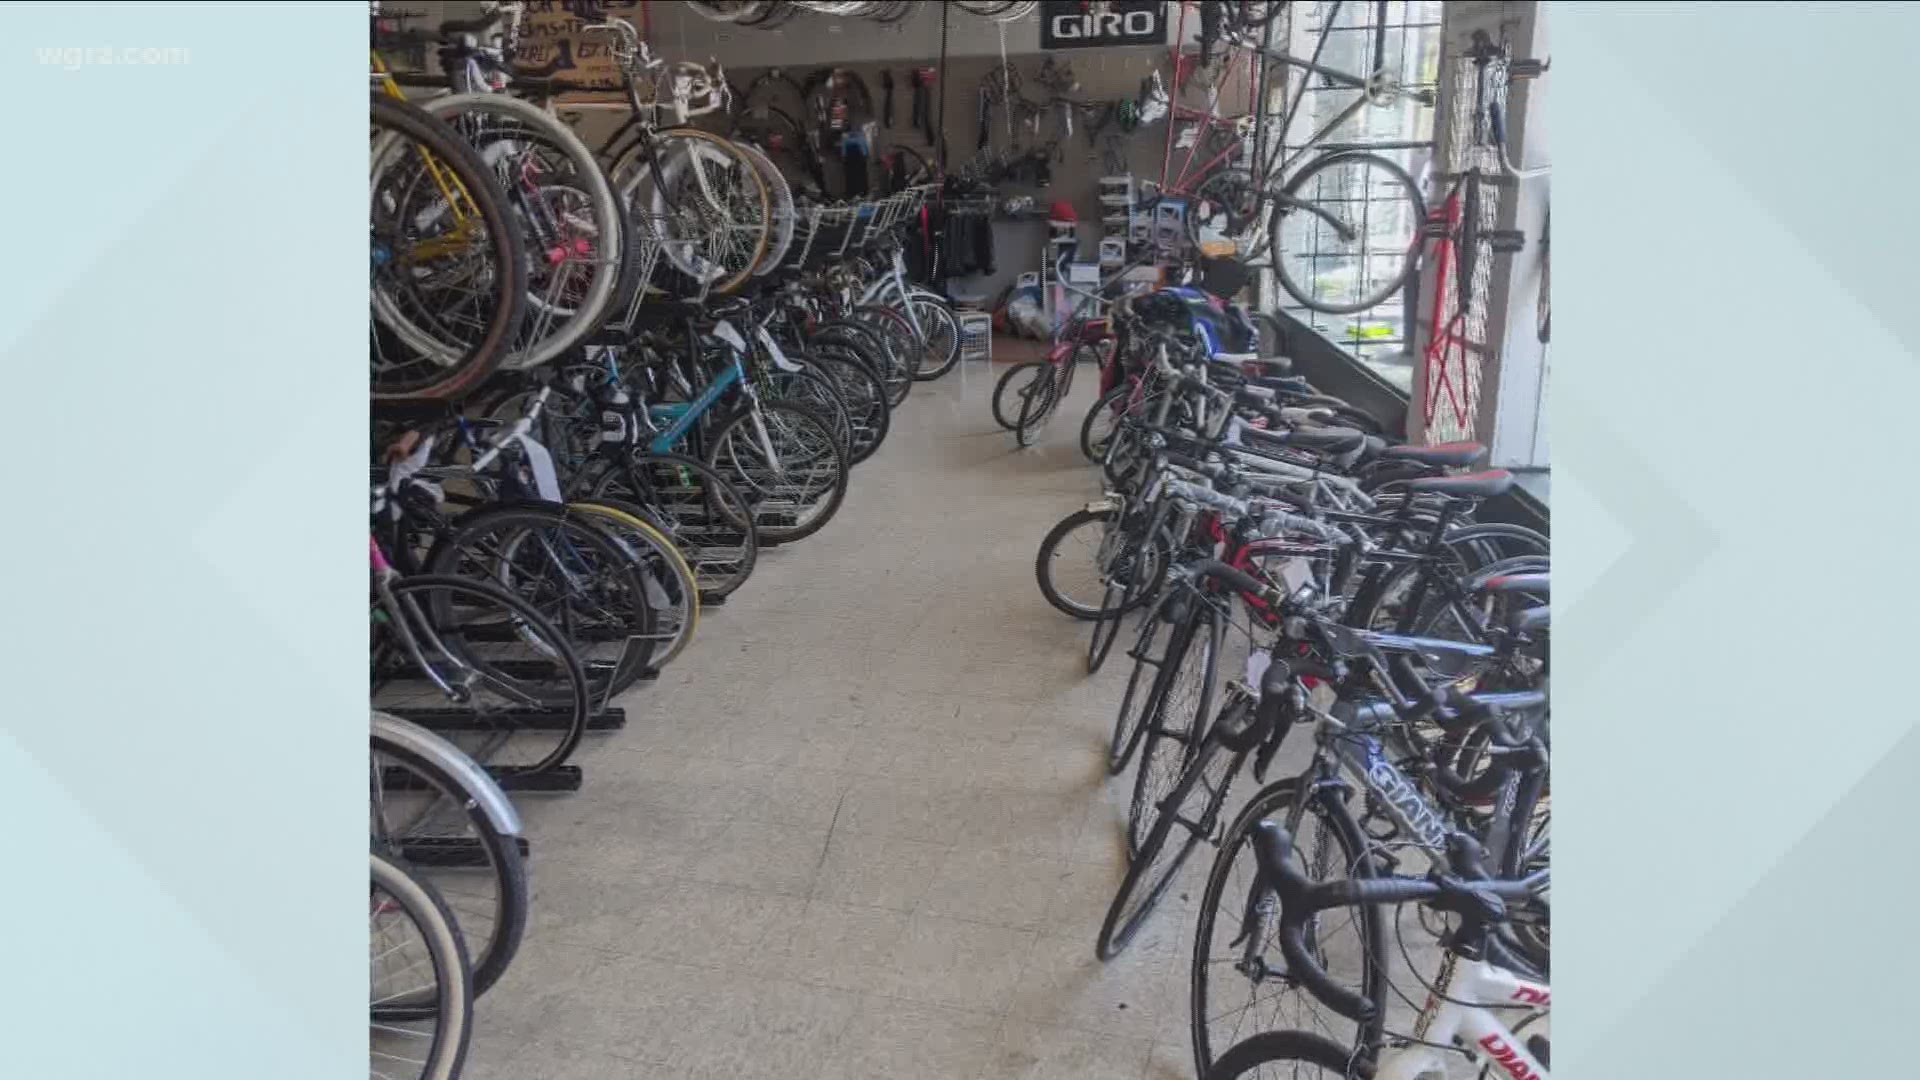 Rick's Cycle Shop in Allentown says they sold out of most of their available bikes by the end of May.